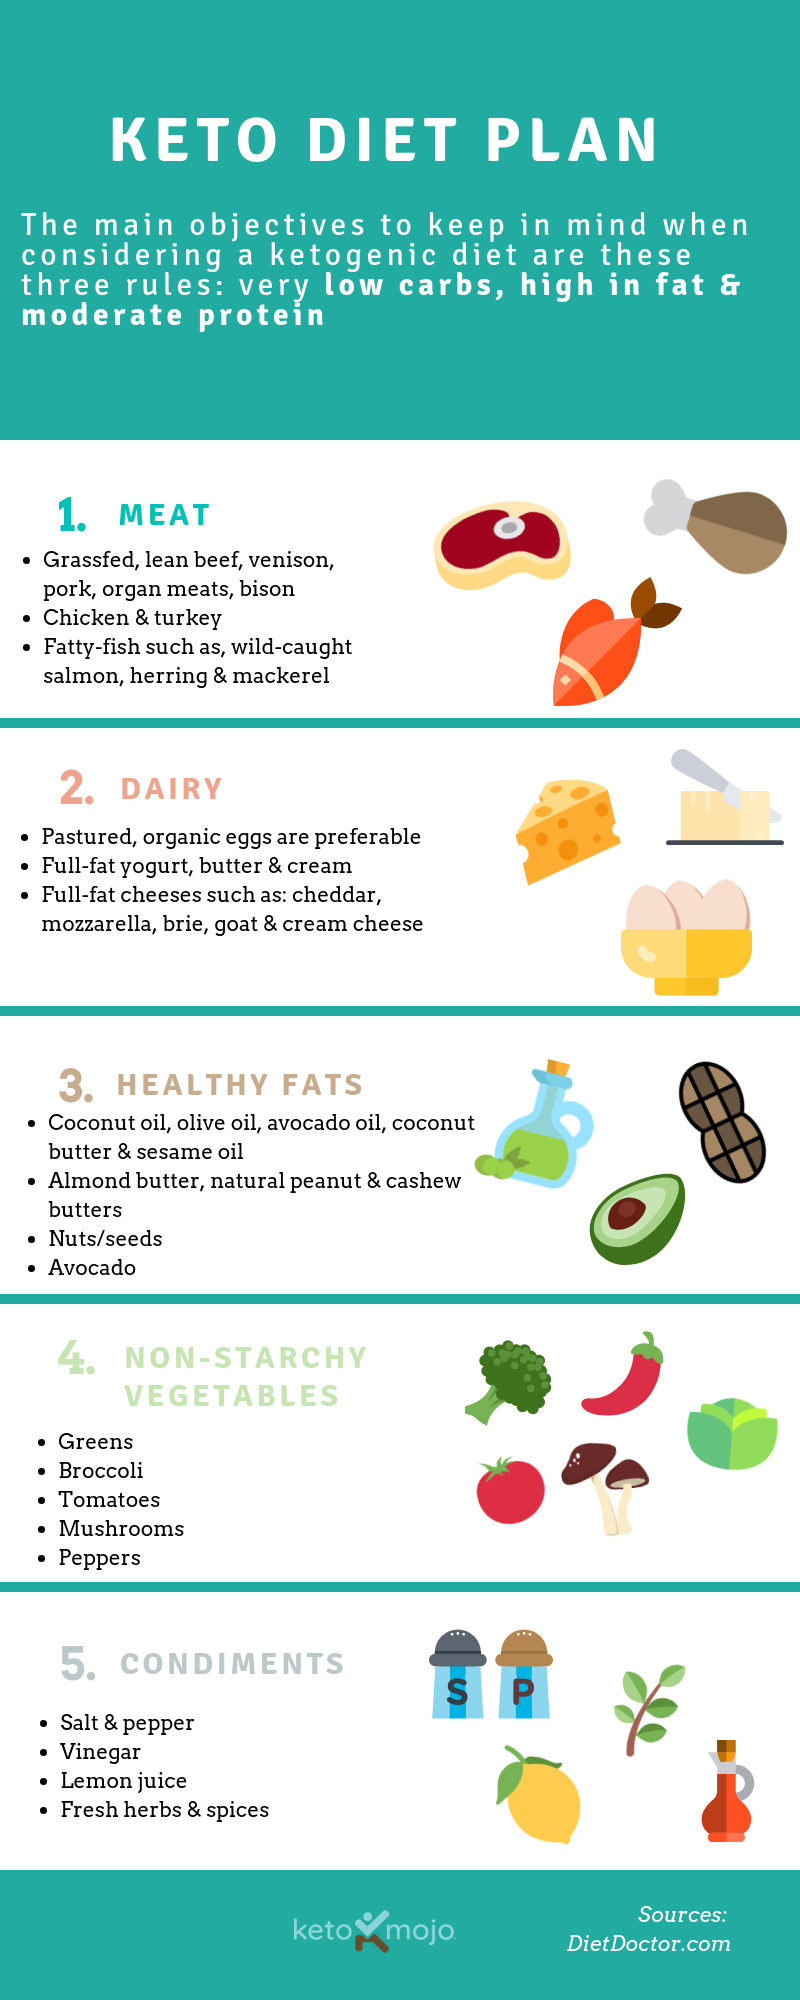 How To Keto For Beginners
 Keto Diet Plan For Beginners